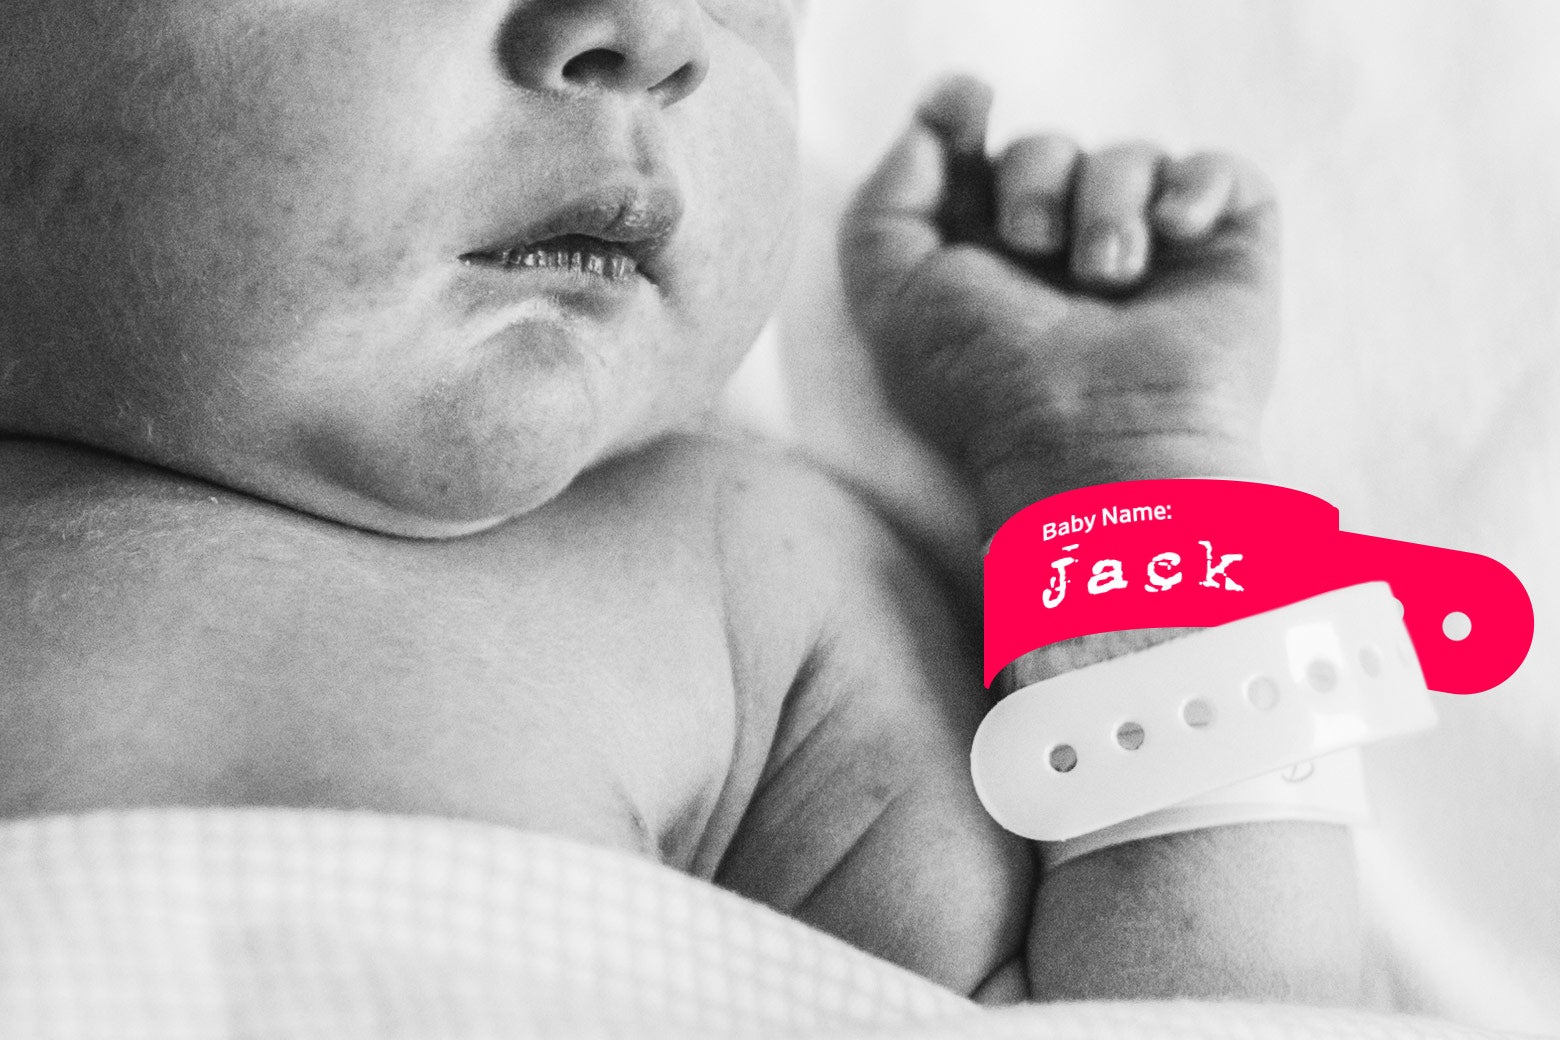 Newborn at a hospital with a wristband that says Jack.